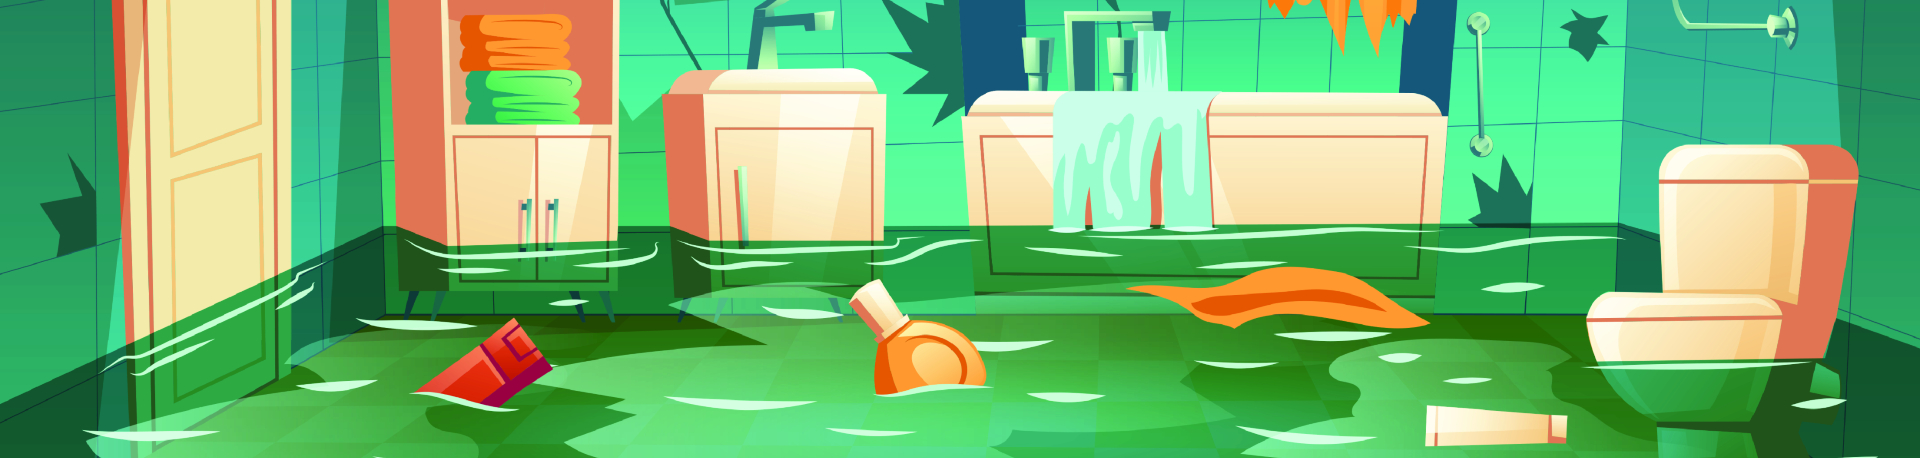 Animated graphic of a flooded bathroom due to poor plumbing.